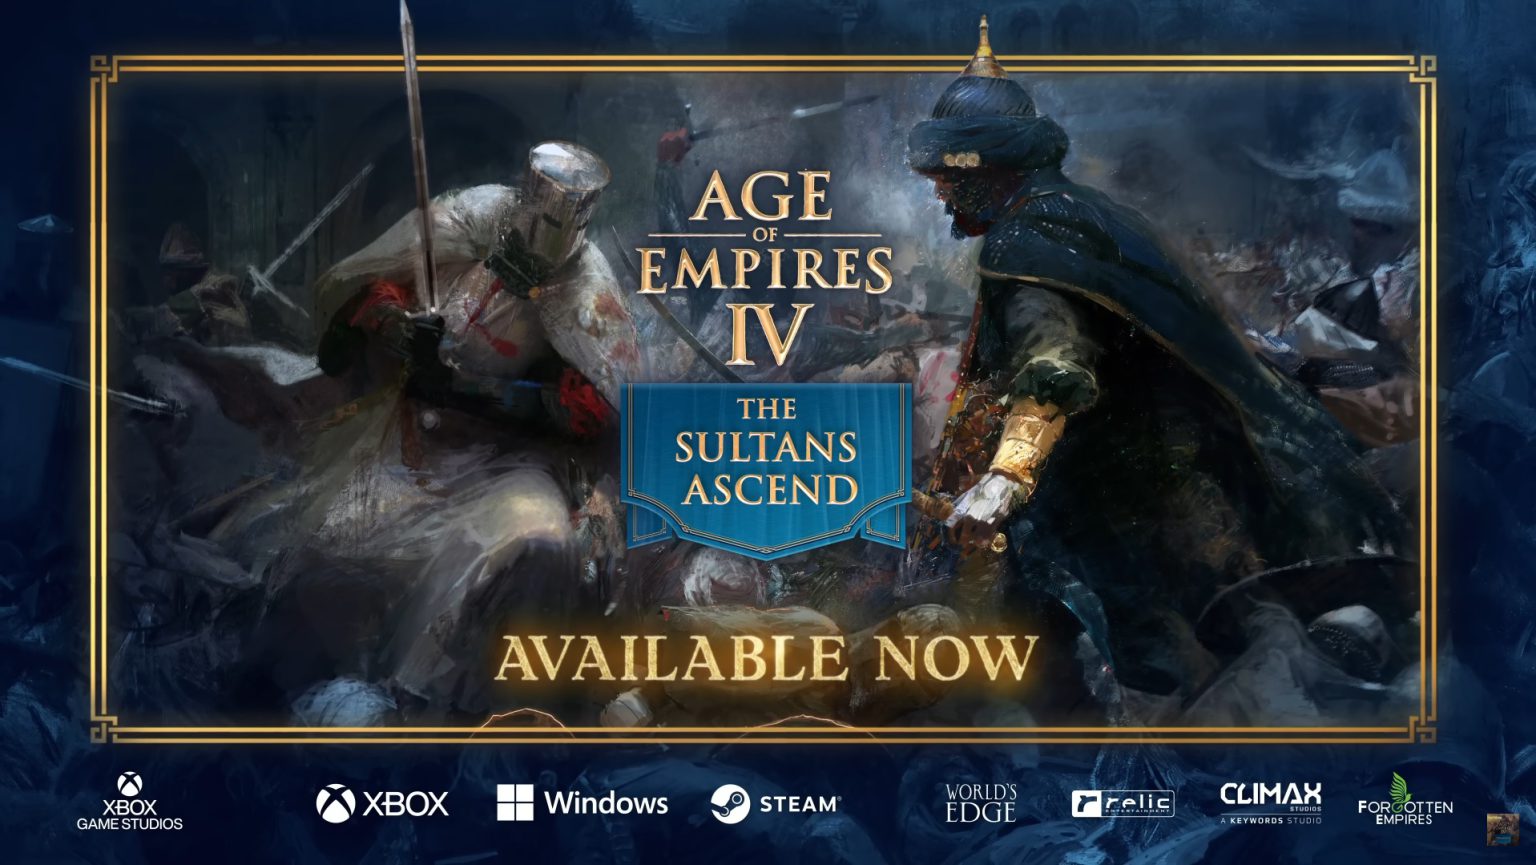 Age of Empires IV - The Sultans Ascend